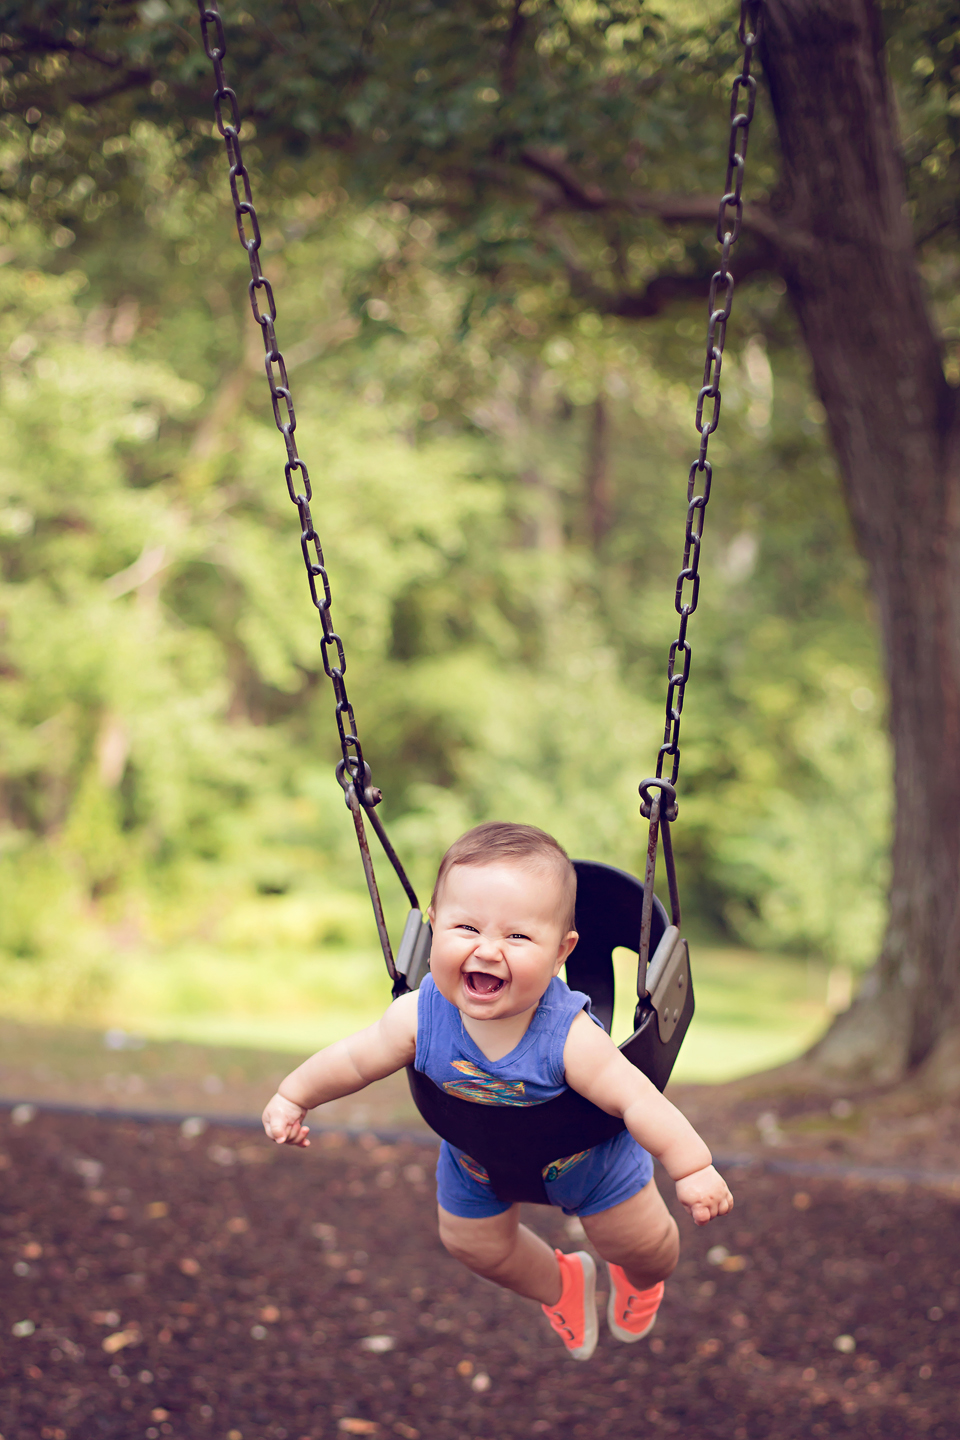 best family images of 2013 | Rockville, MD Photographer, Tonya Teran Photography